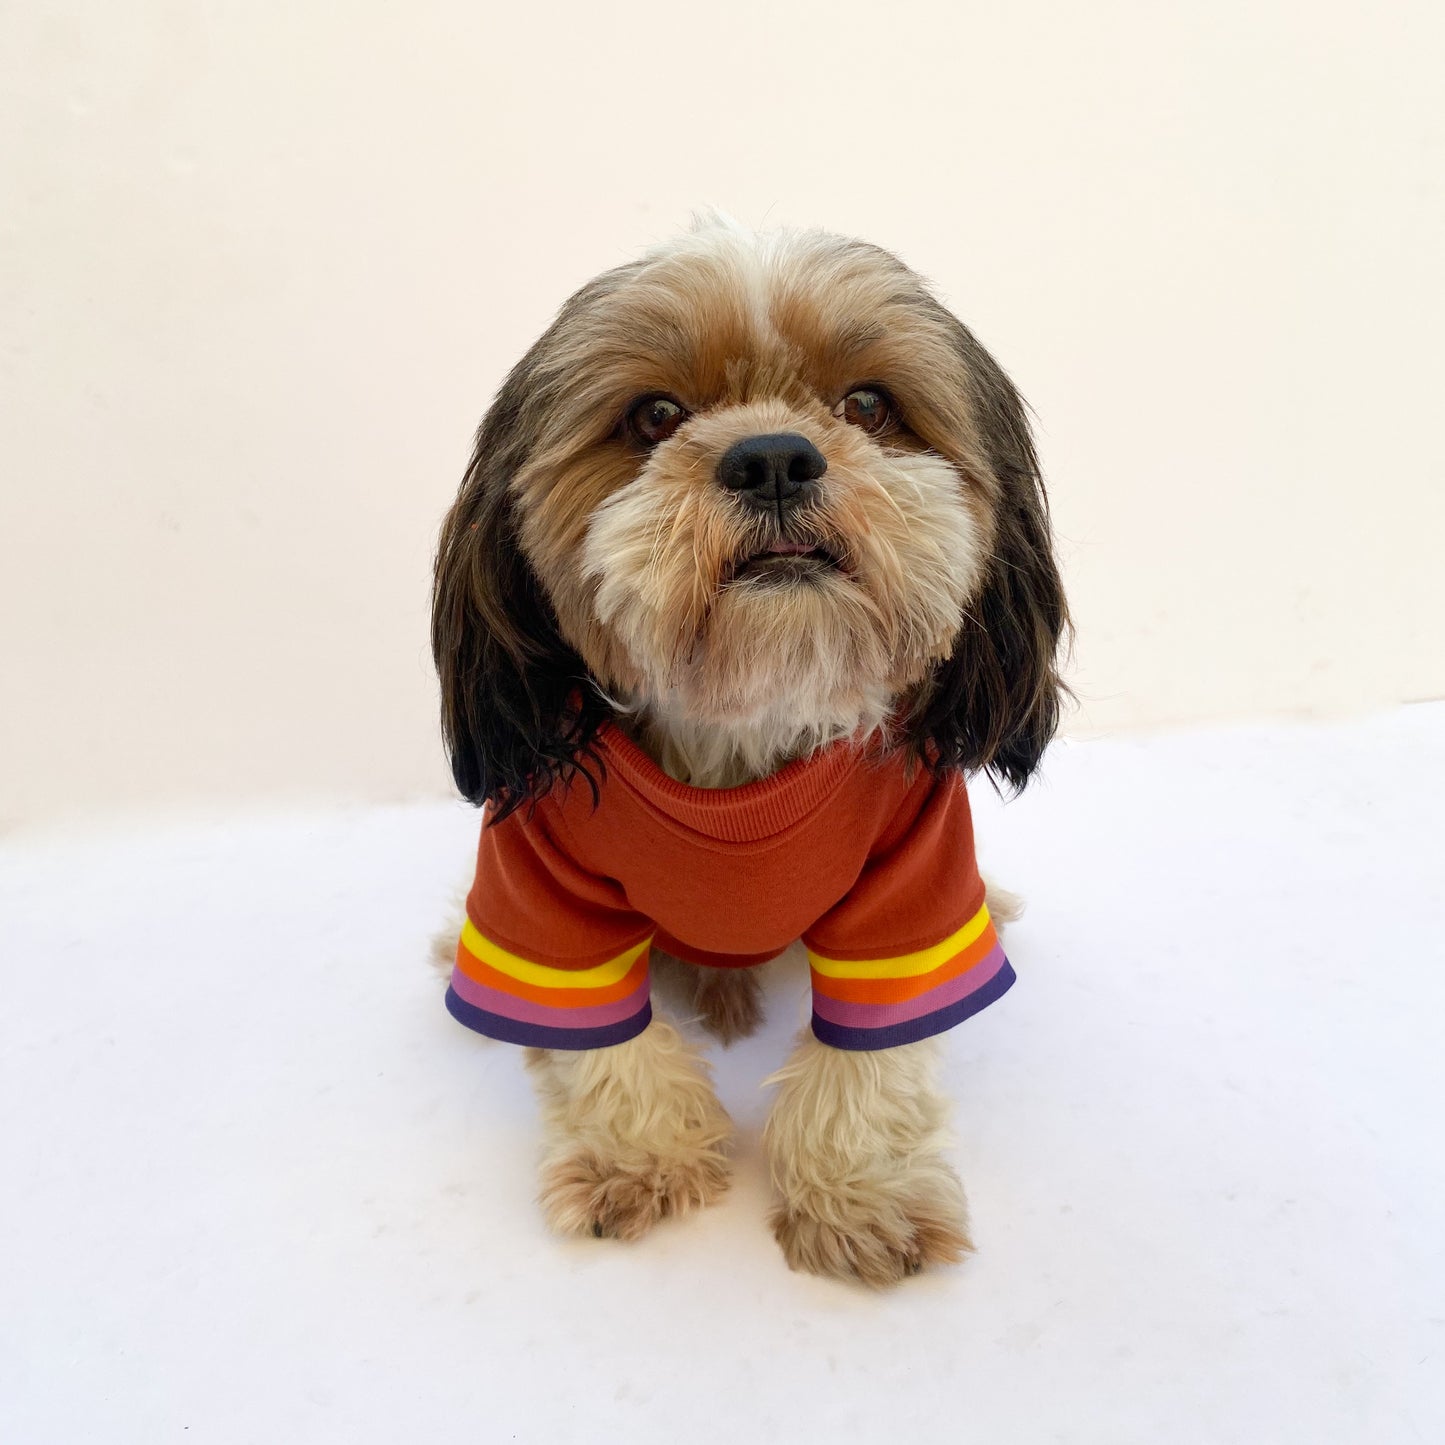 Pawgy Pets Smiley Rust Sweatshirt for Dogs & Cats